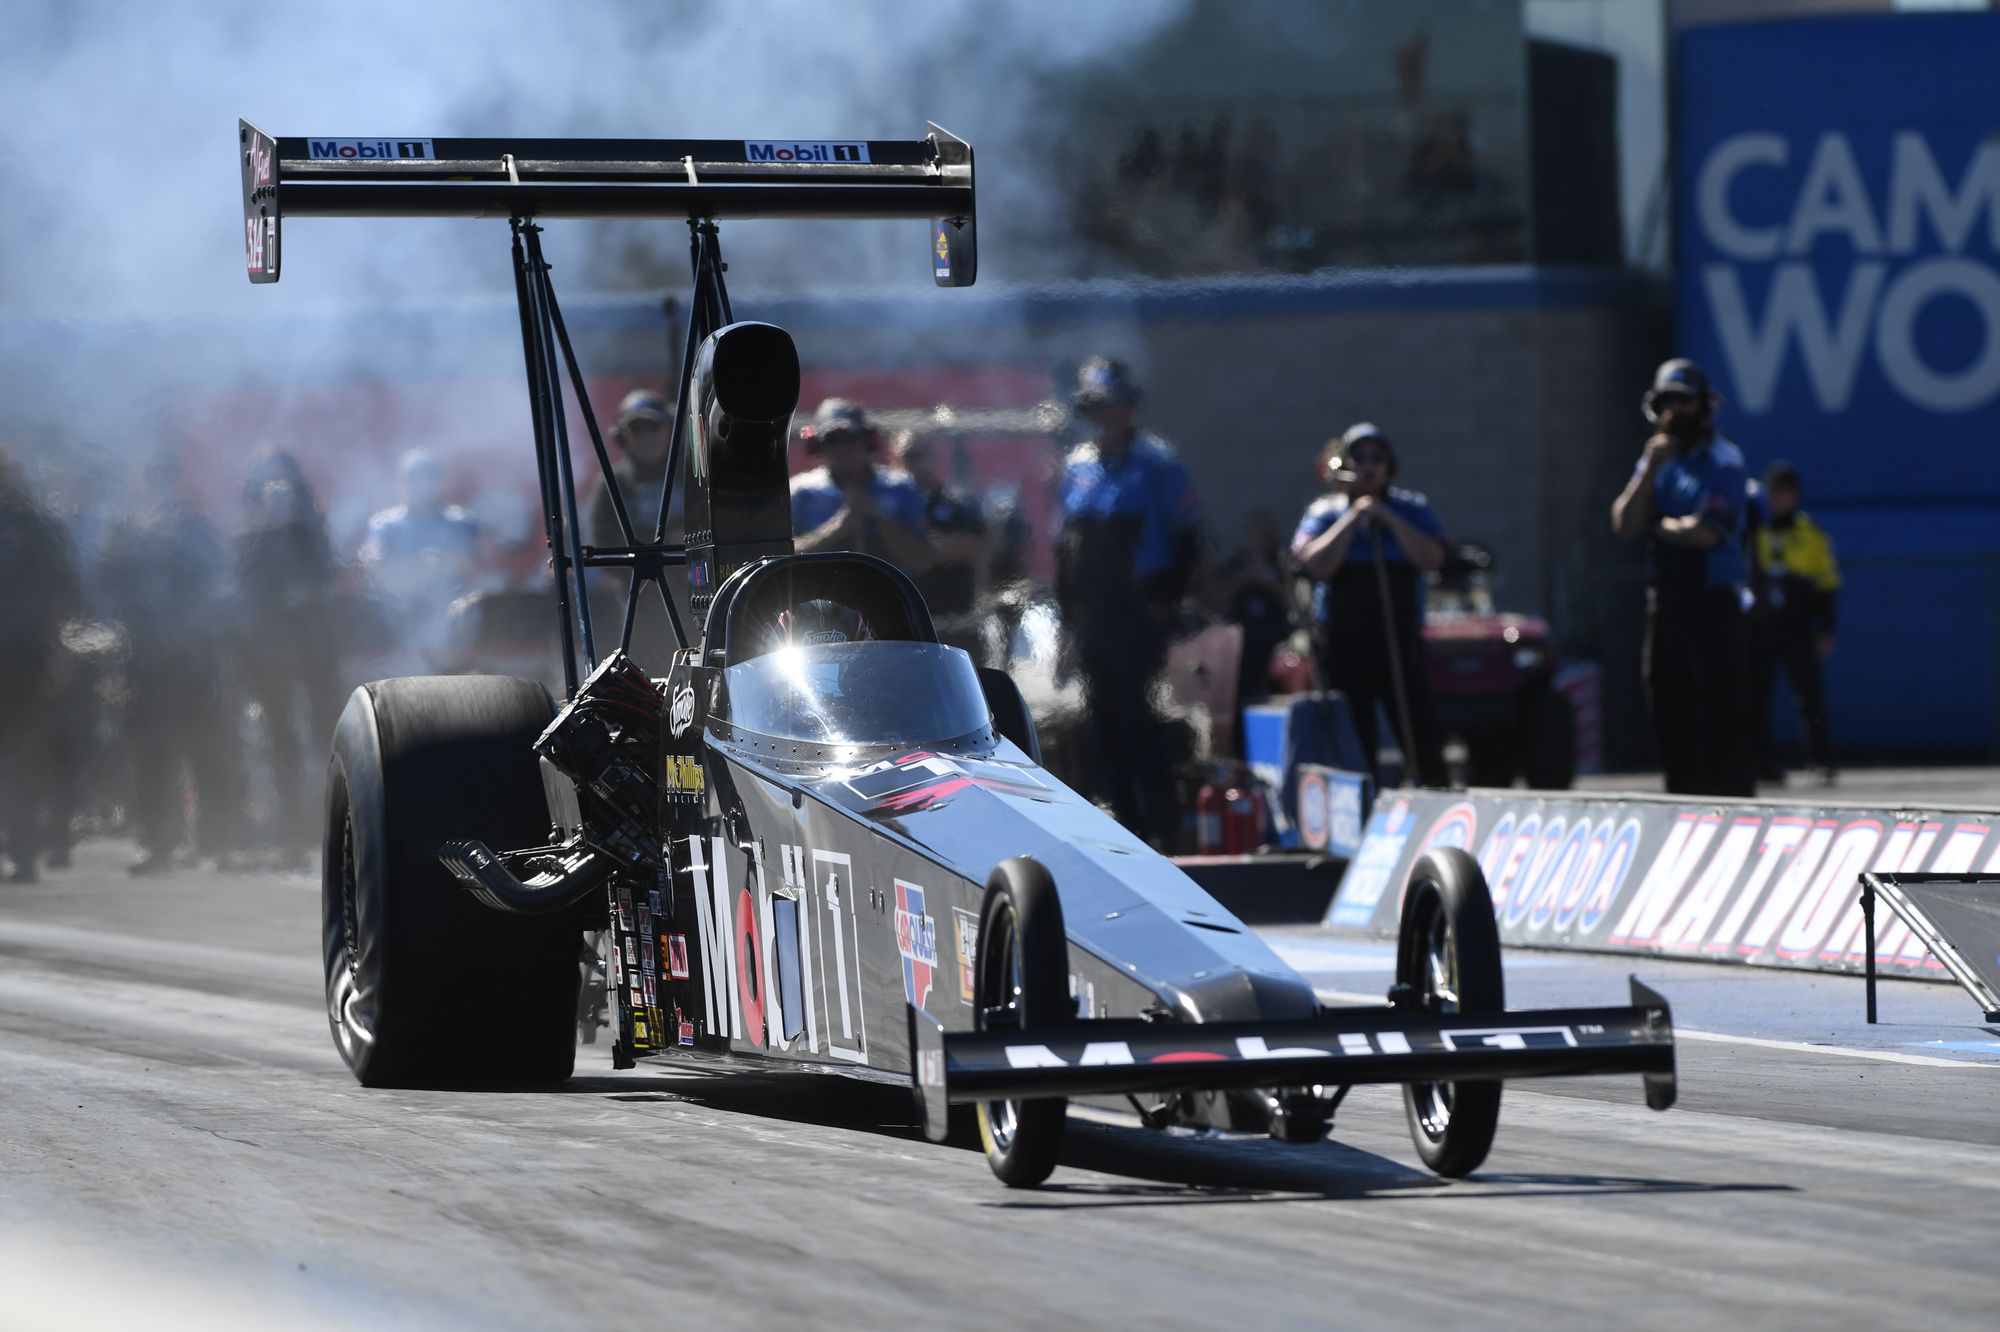 Tony Stewart Talks Driving NHRA Dragster And His Racing Career Plans